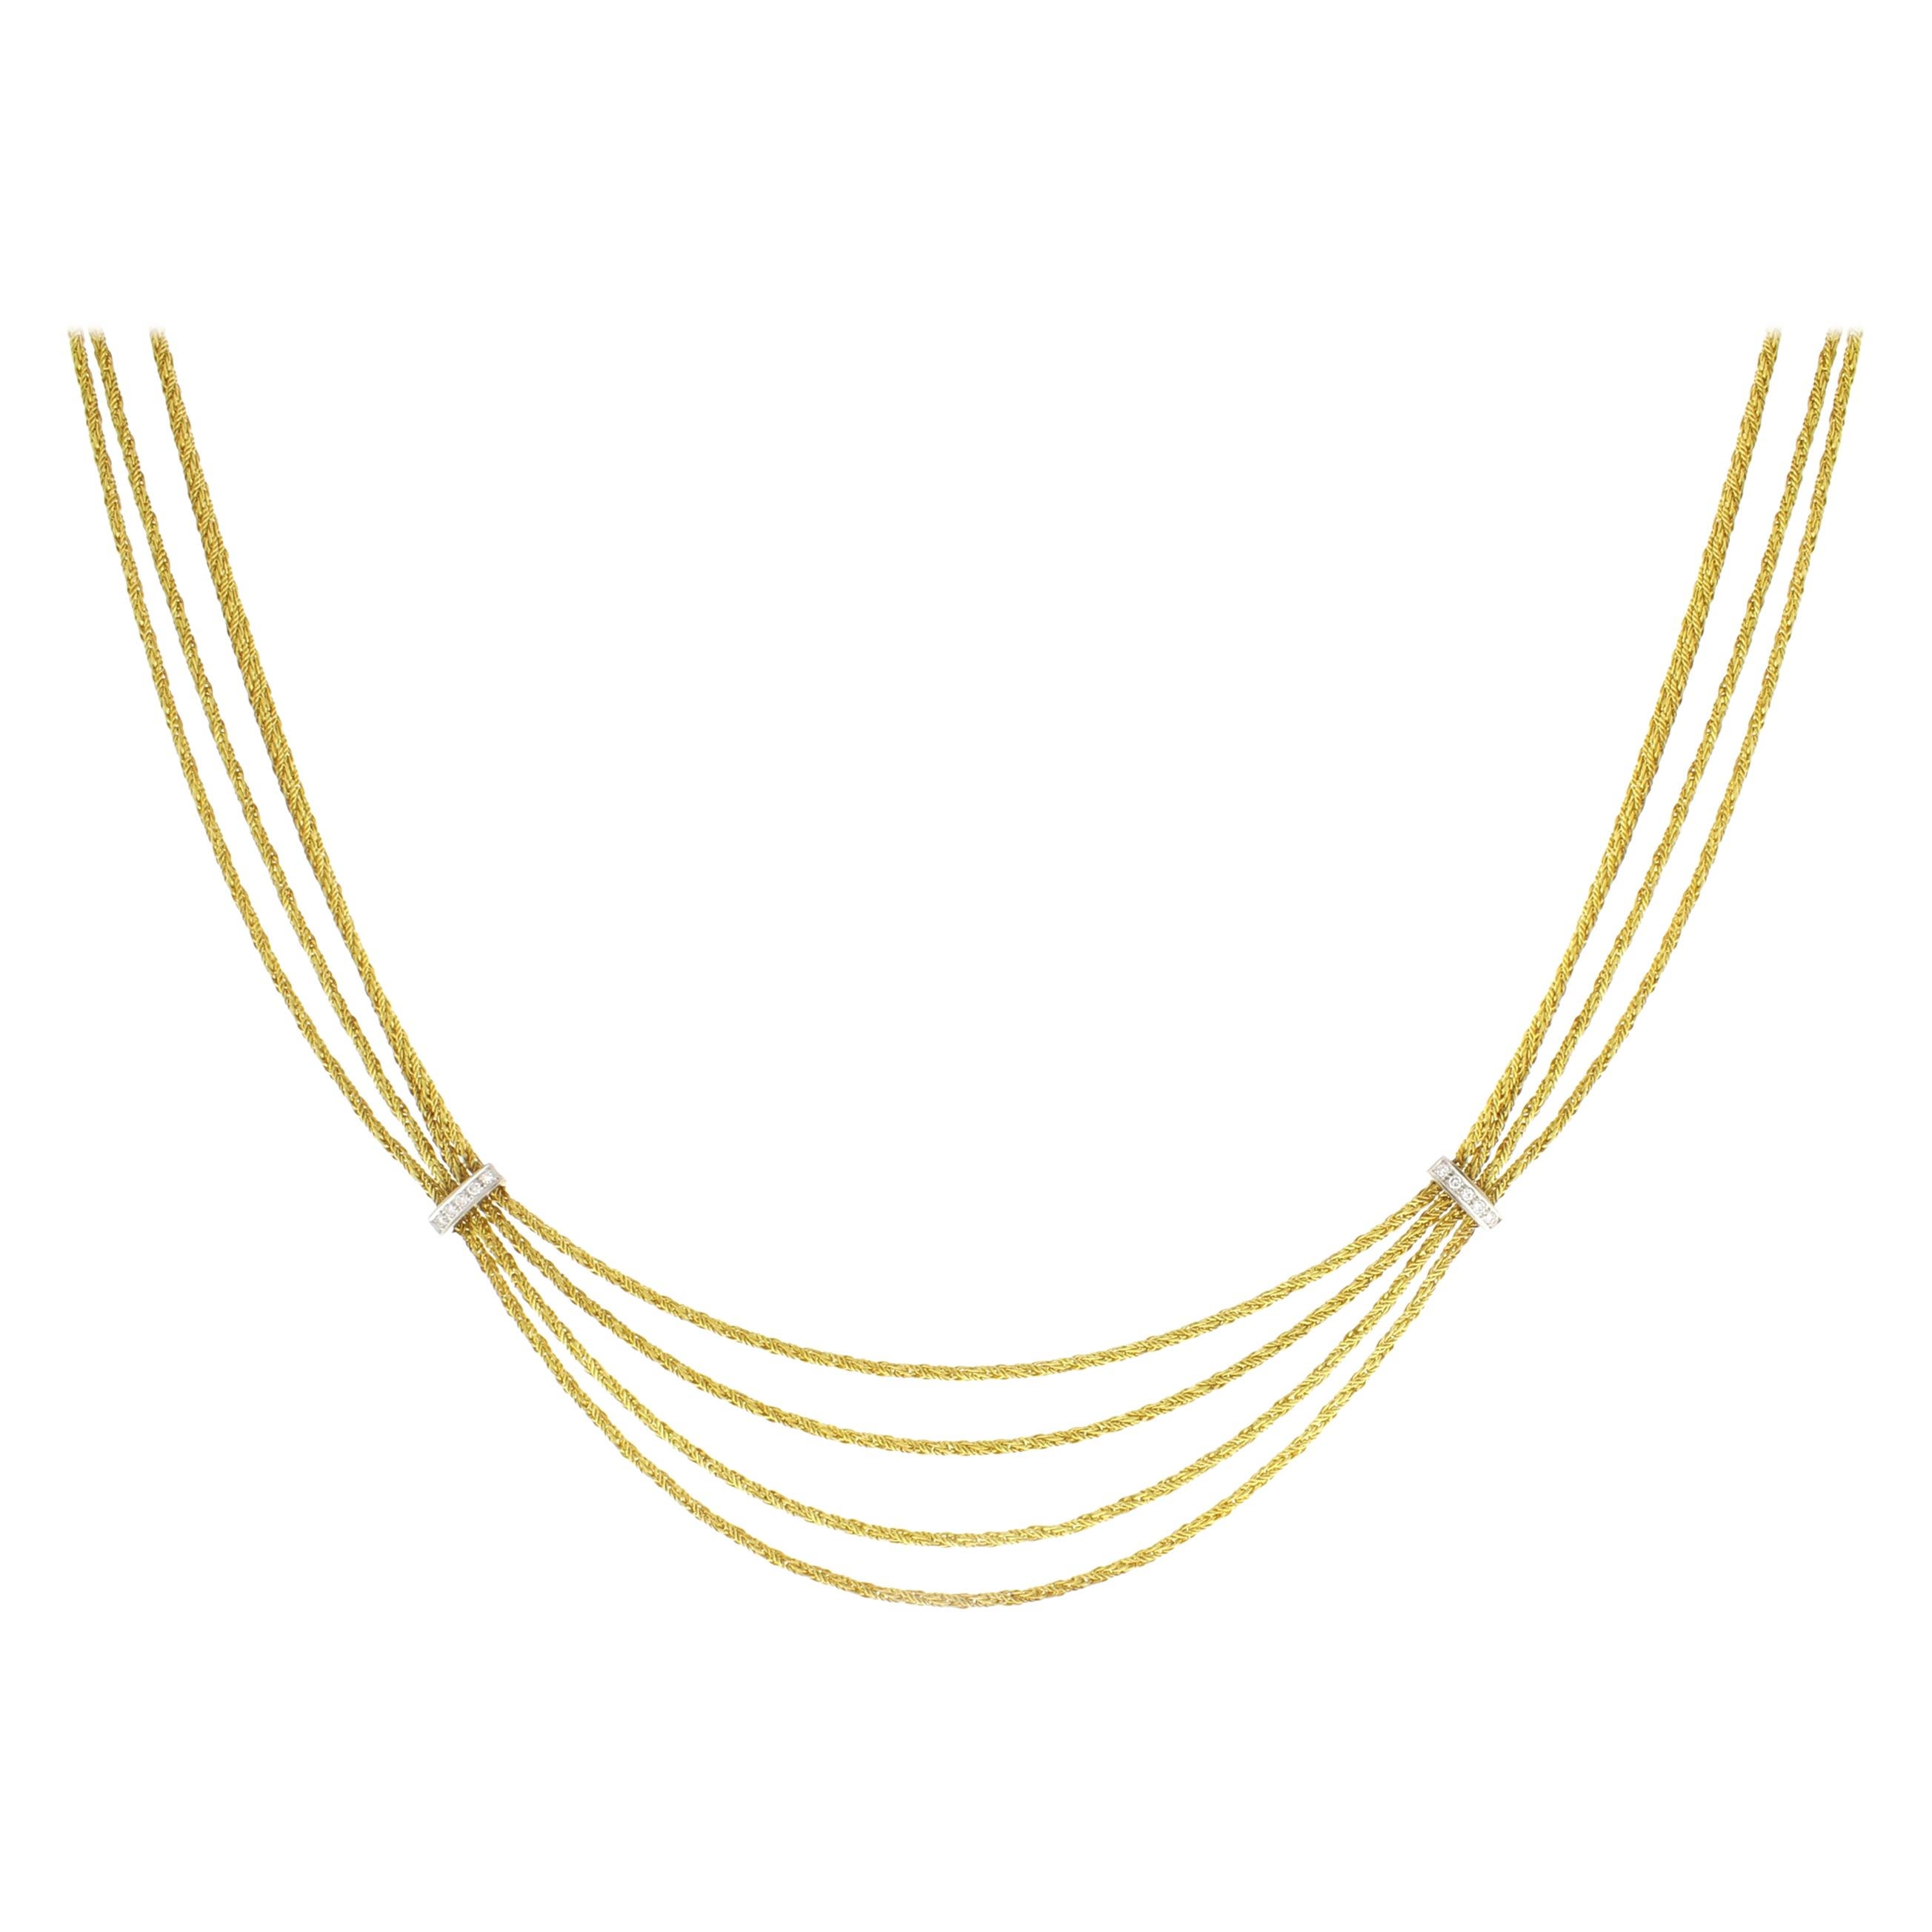 Tiffany & Co. Four-Stand Gold and Diamond Necklace